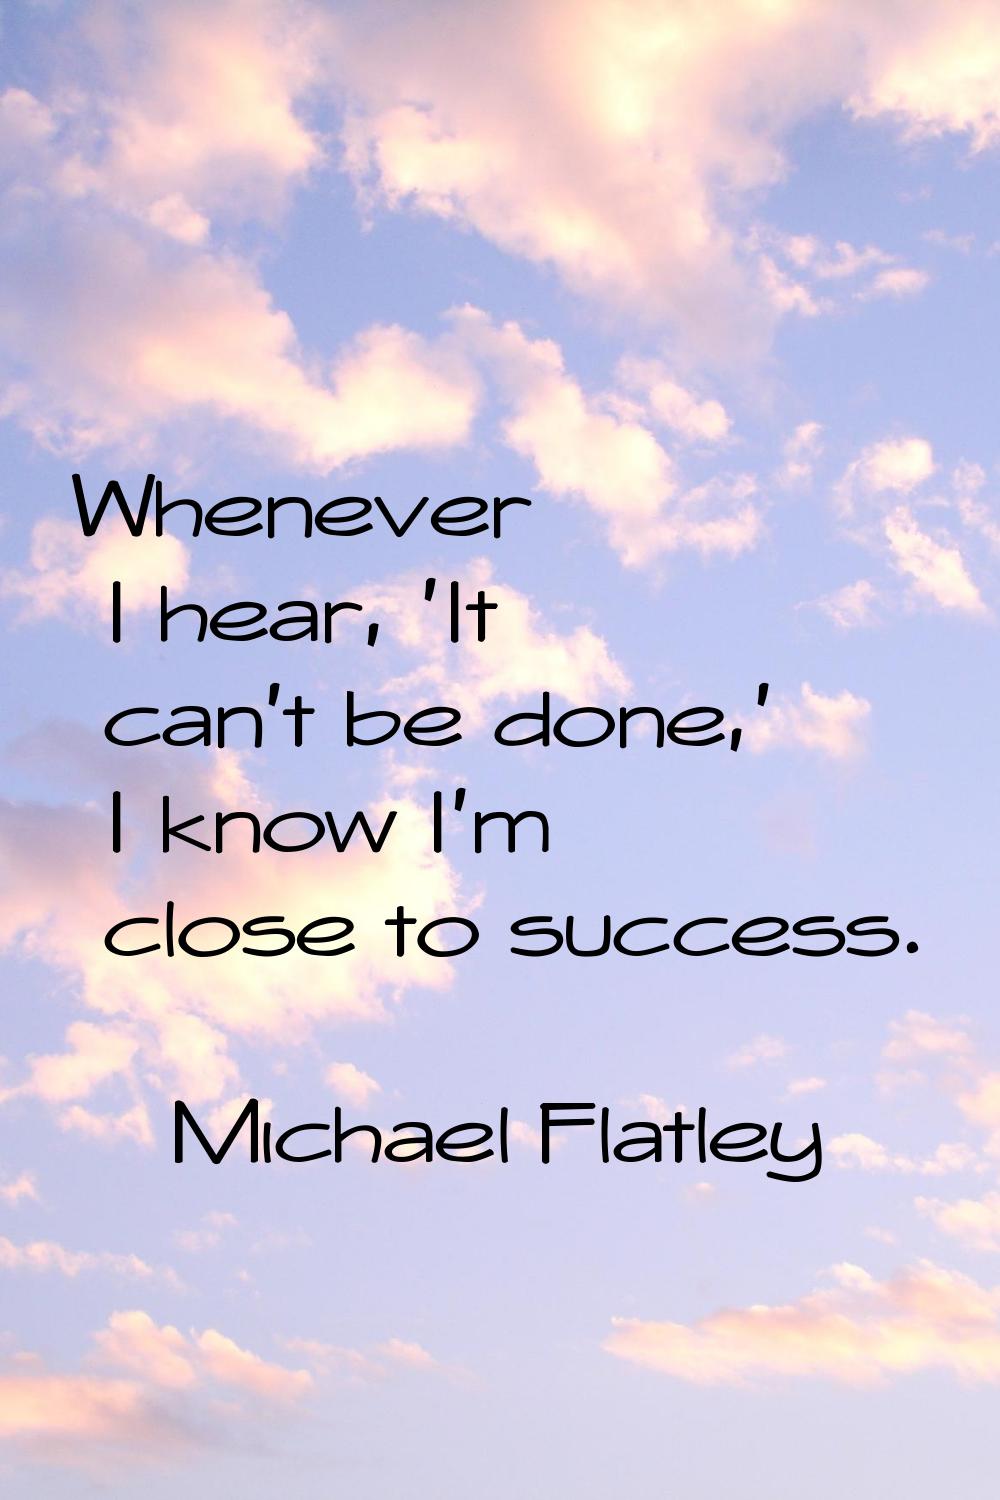 Whenever I hear, 'It can't be done,' I know I'm close to success.